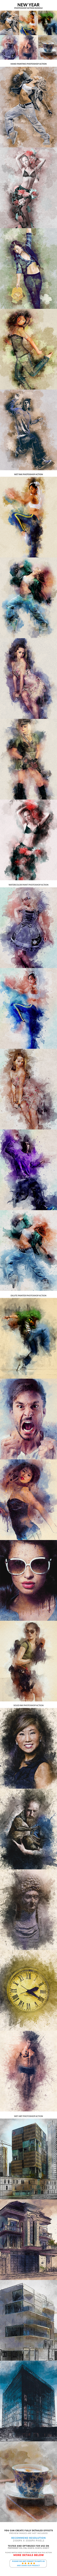 GraphicRiver New Year Photoshop Action Bundle 21173802